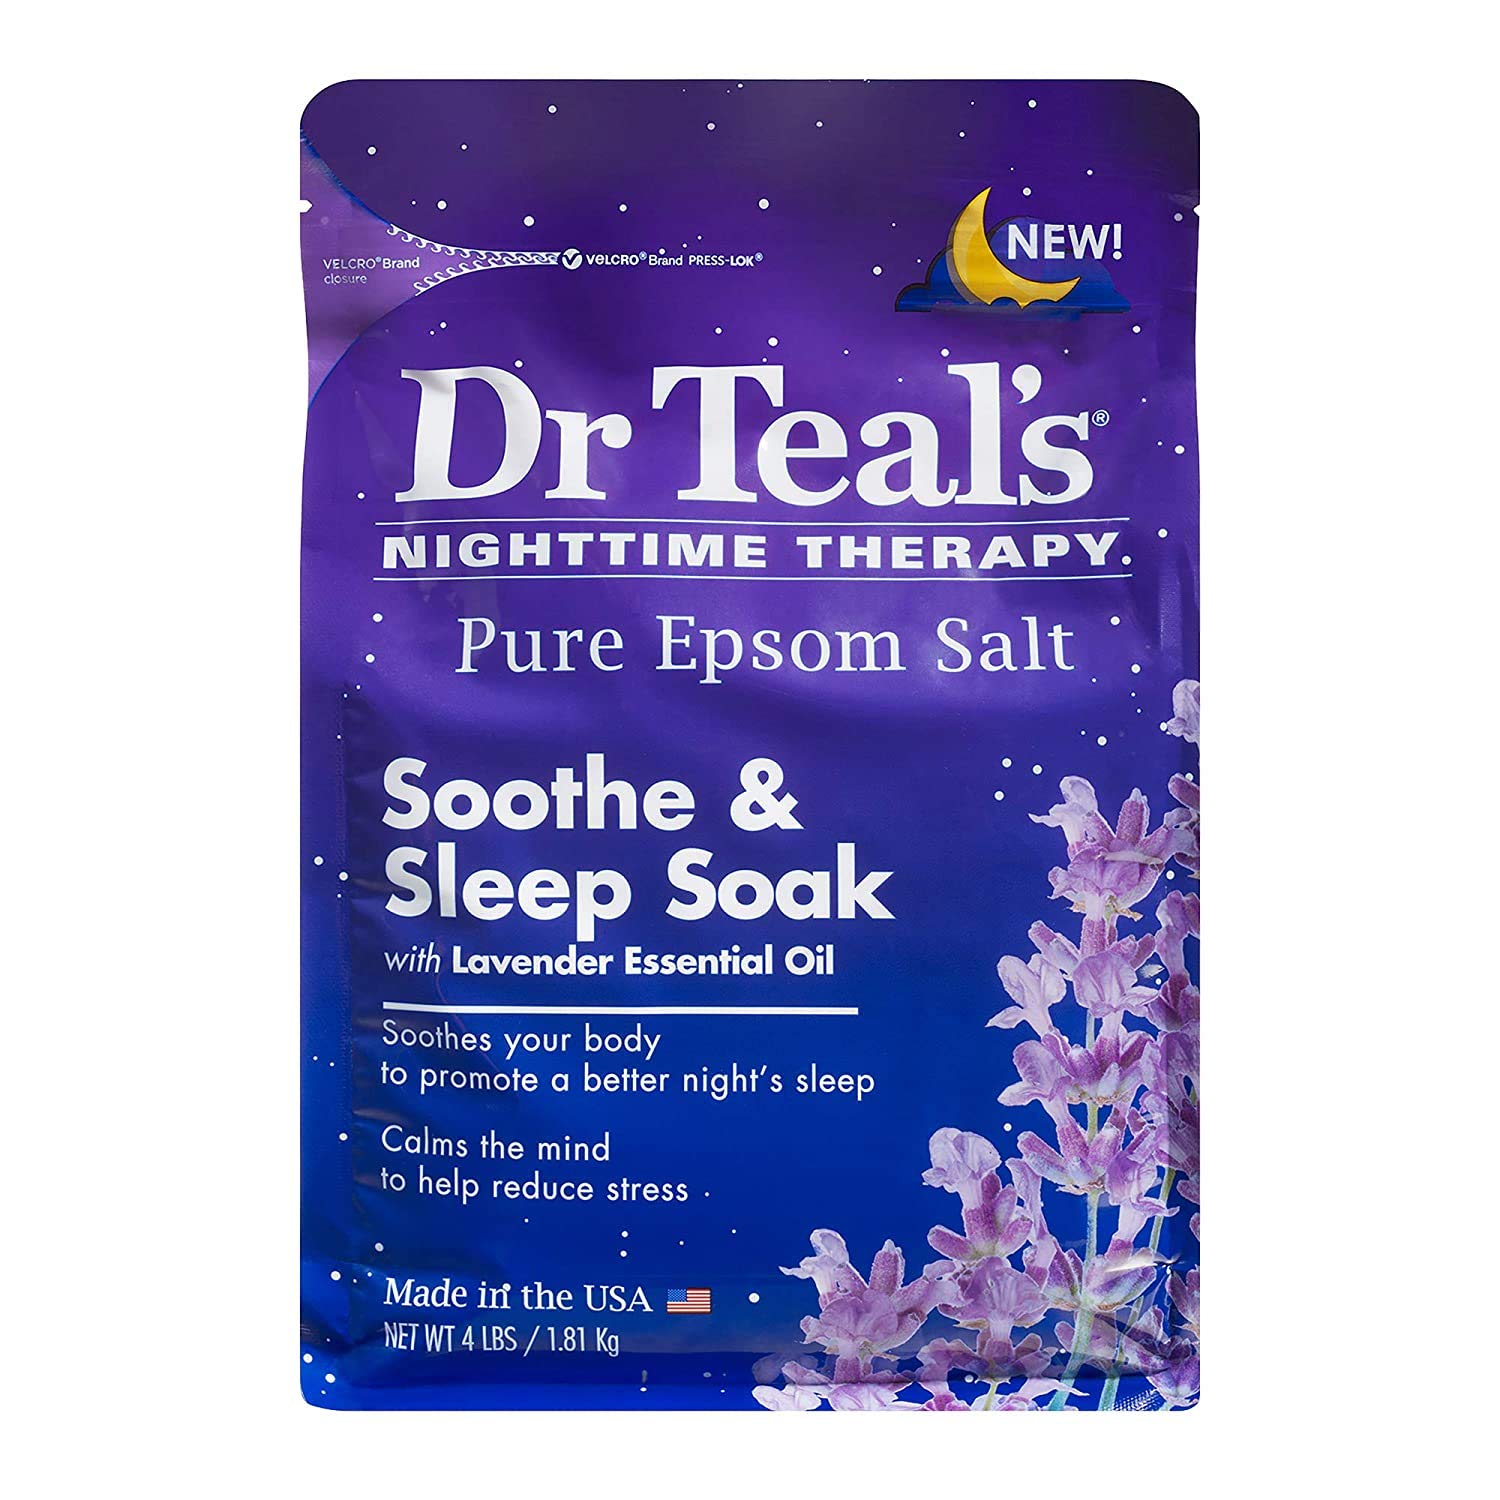 Dr Teal's Epsom Salt 4-pack (16 lbs Total) Nighttime Therapy Soak with Lavender Essential Oil